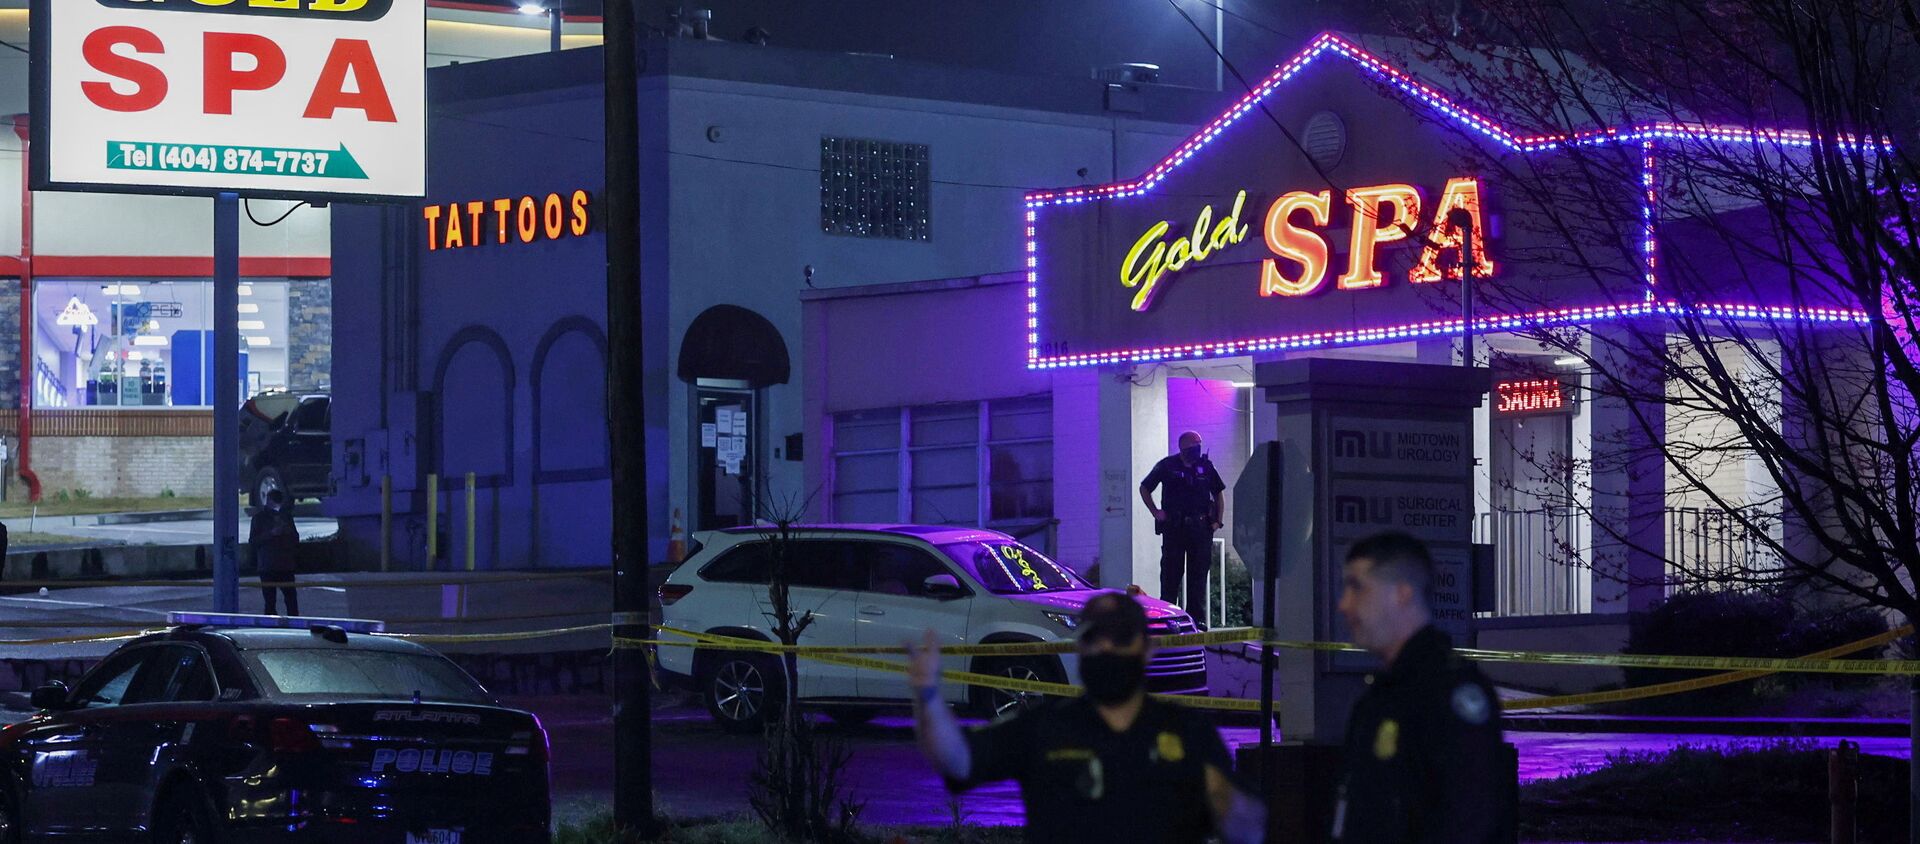 City of Atlanta police officers are seen outside of Gold Spa after deadly shootings at a massage parlor and two day spas in the Atlanta area, in Atlanta, Georgia, U.S. March 16, 2021. REUTERS/Chris Aluka Berry   - Sputnik International, 1920, 17.03.2021